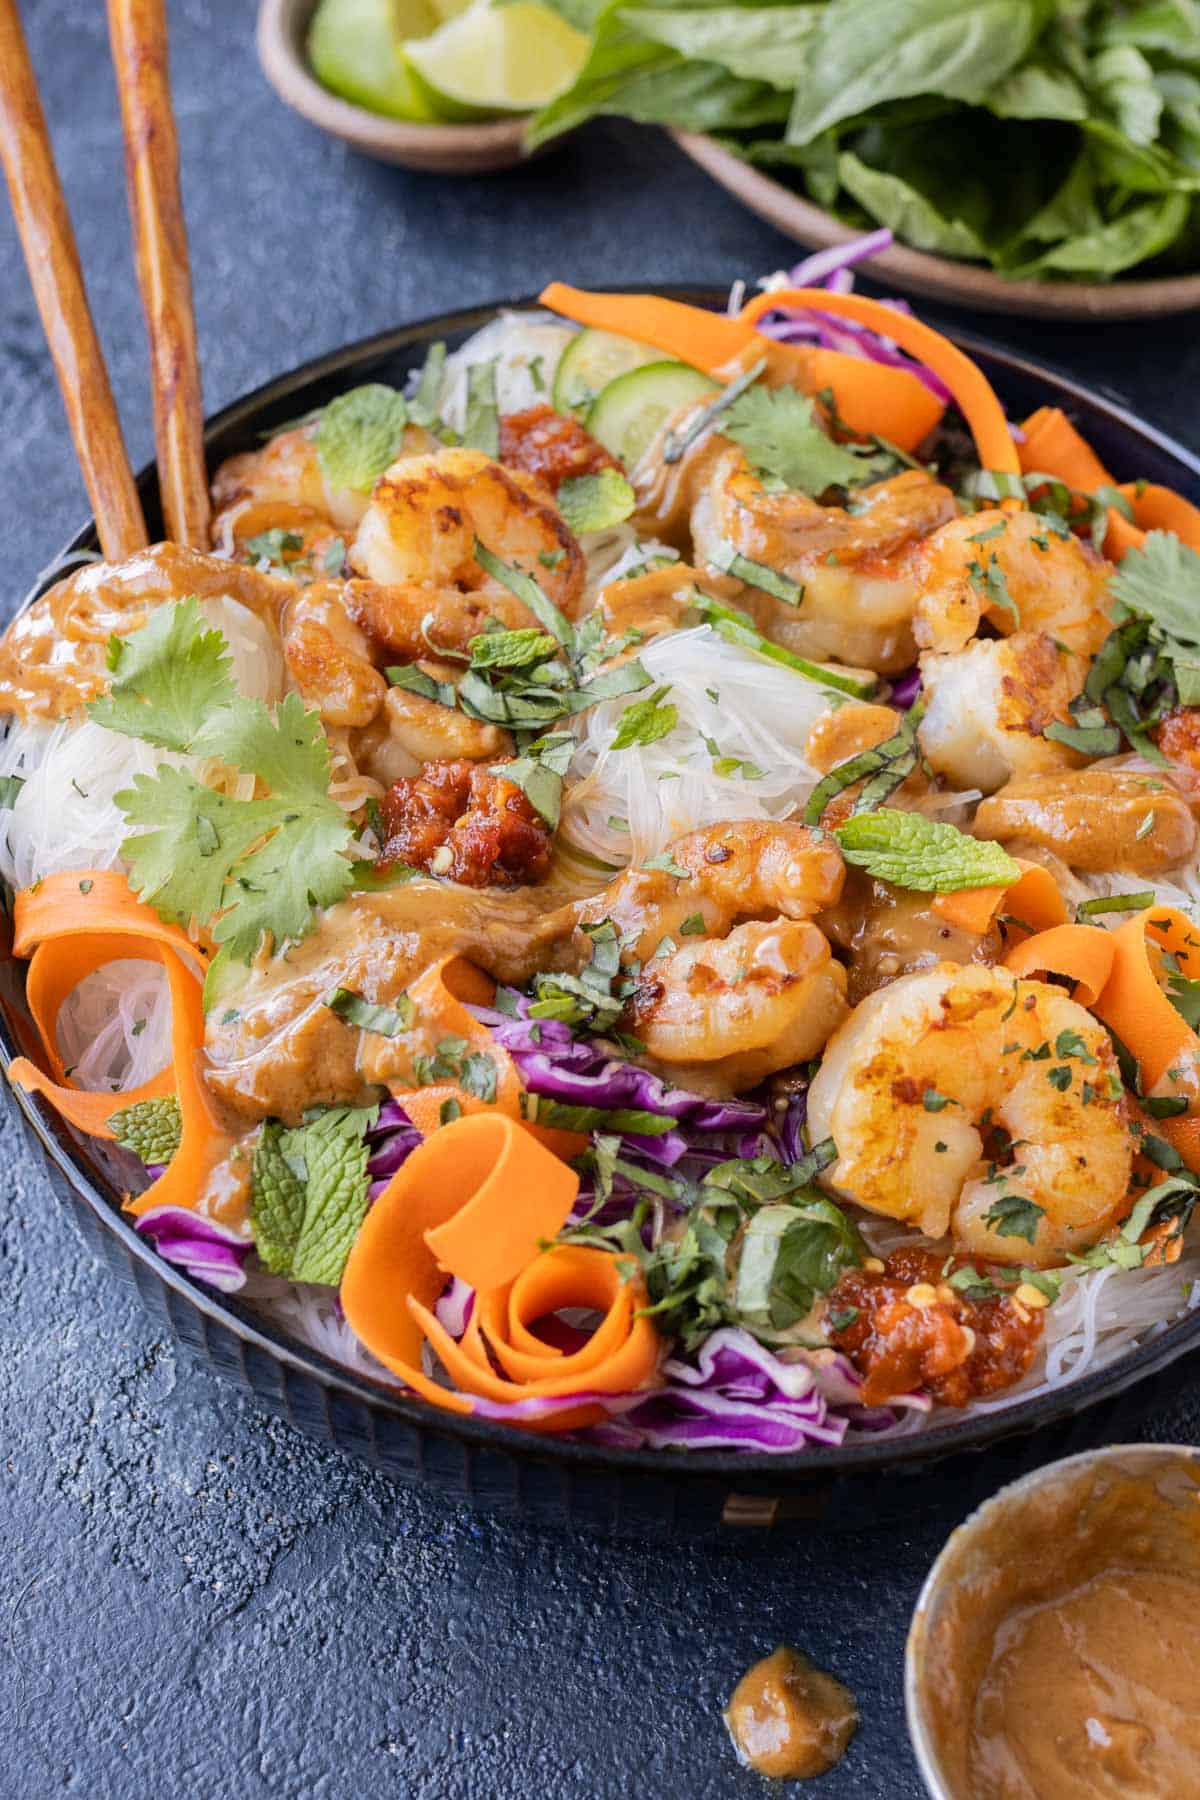 A deconstructed spring roll is served in a bowl with shrimp and fresh veggies.